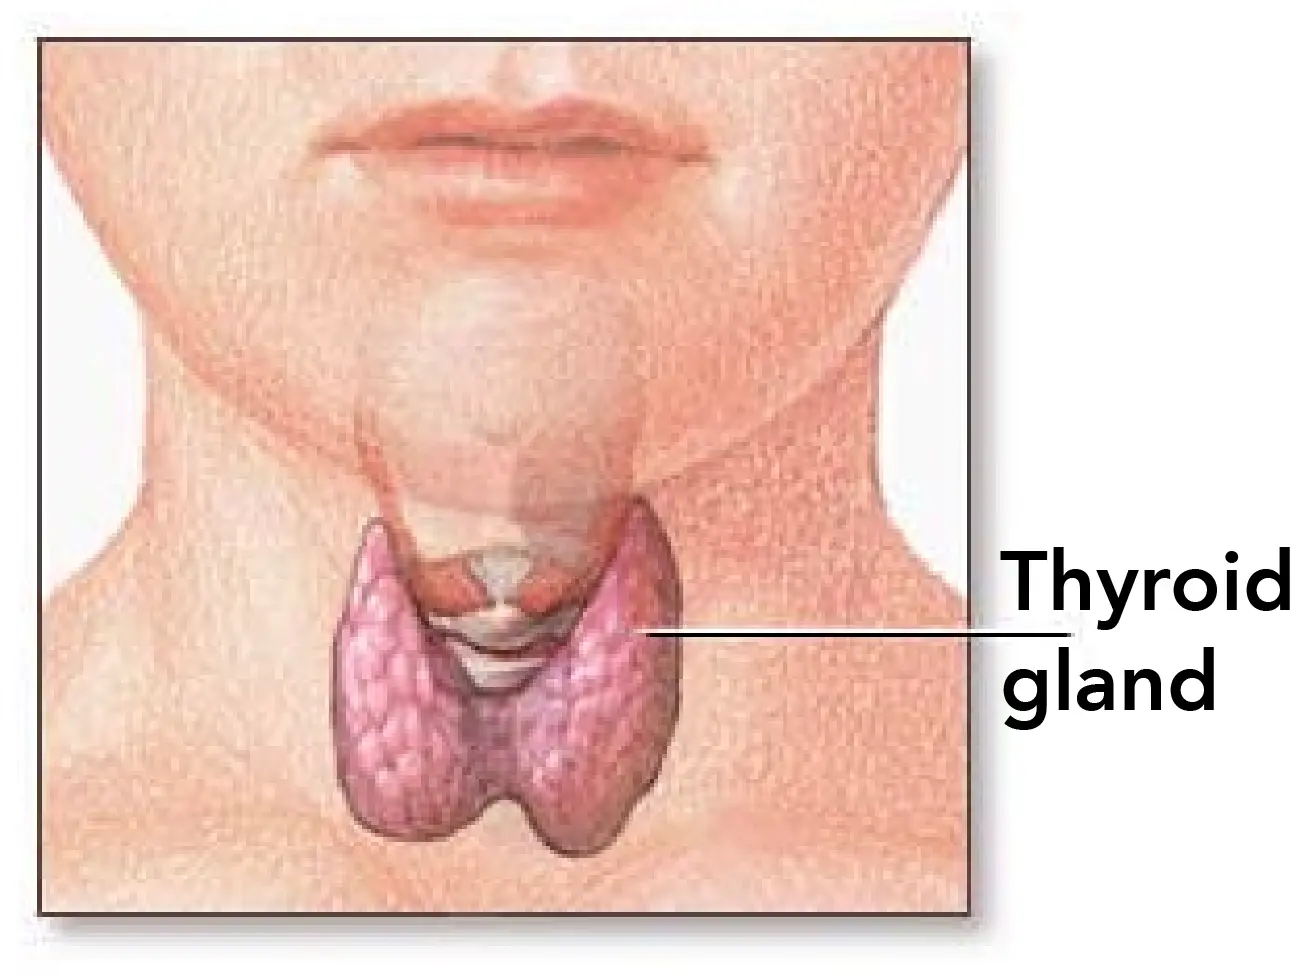 The thyroid gland produces hormones that regulate protein, fat, and carbohydrate metabolism.